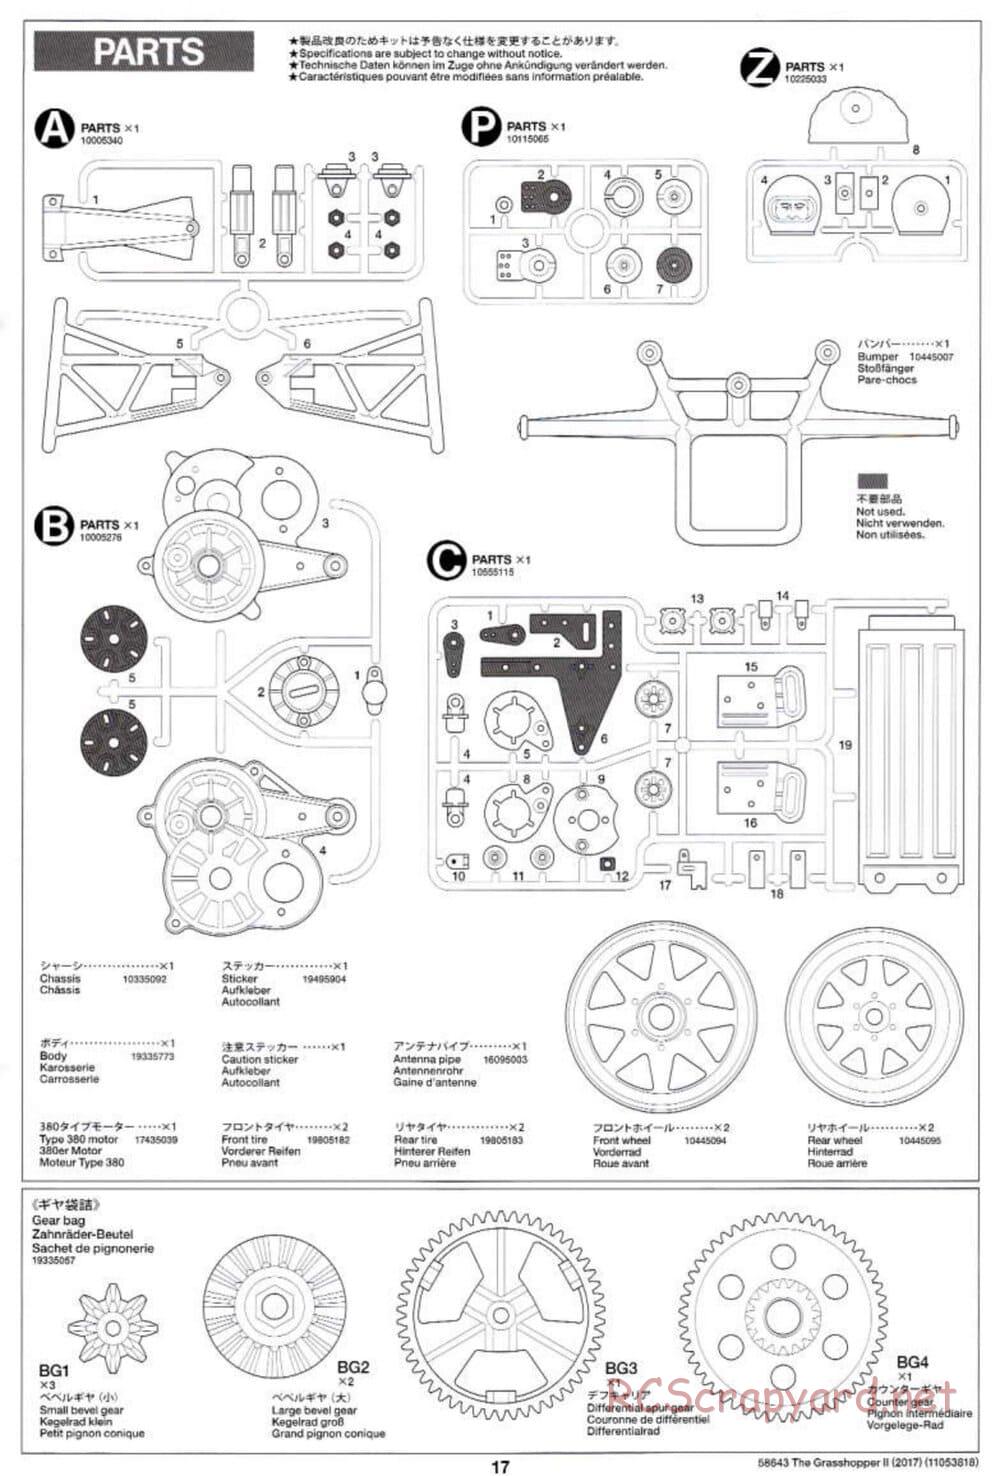 Tamiya - The Grasshopper II (2017) - GH Chassis - Manual - Page 17